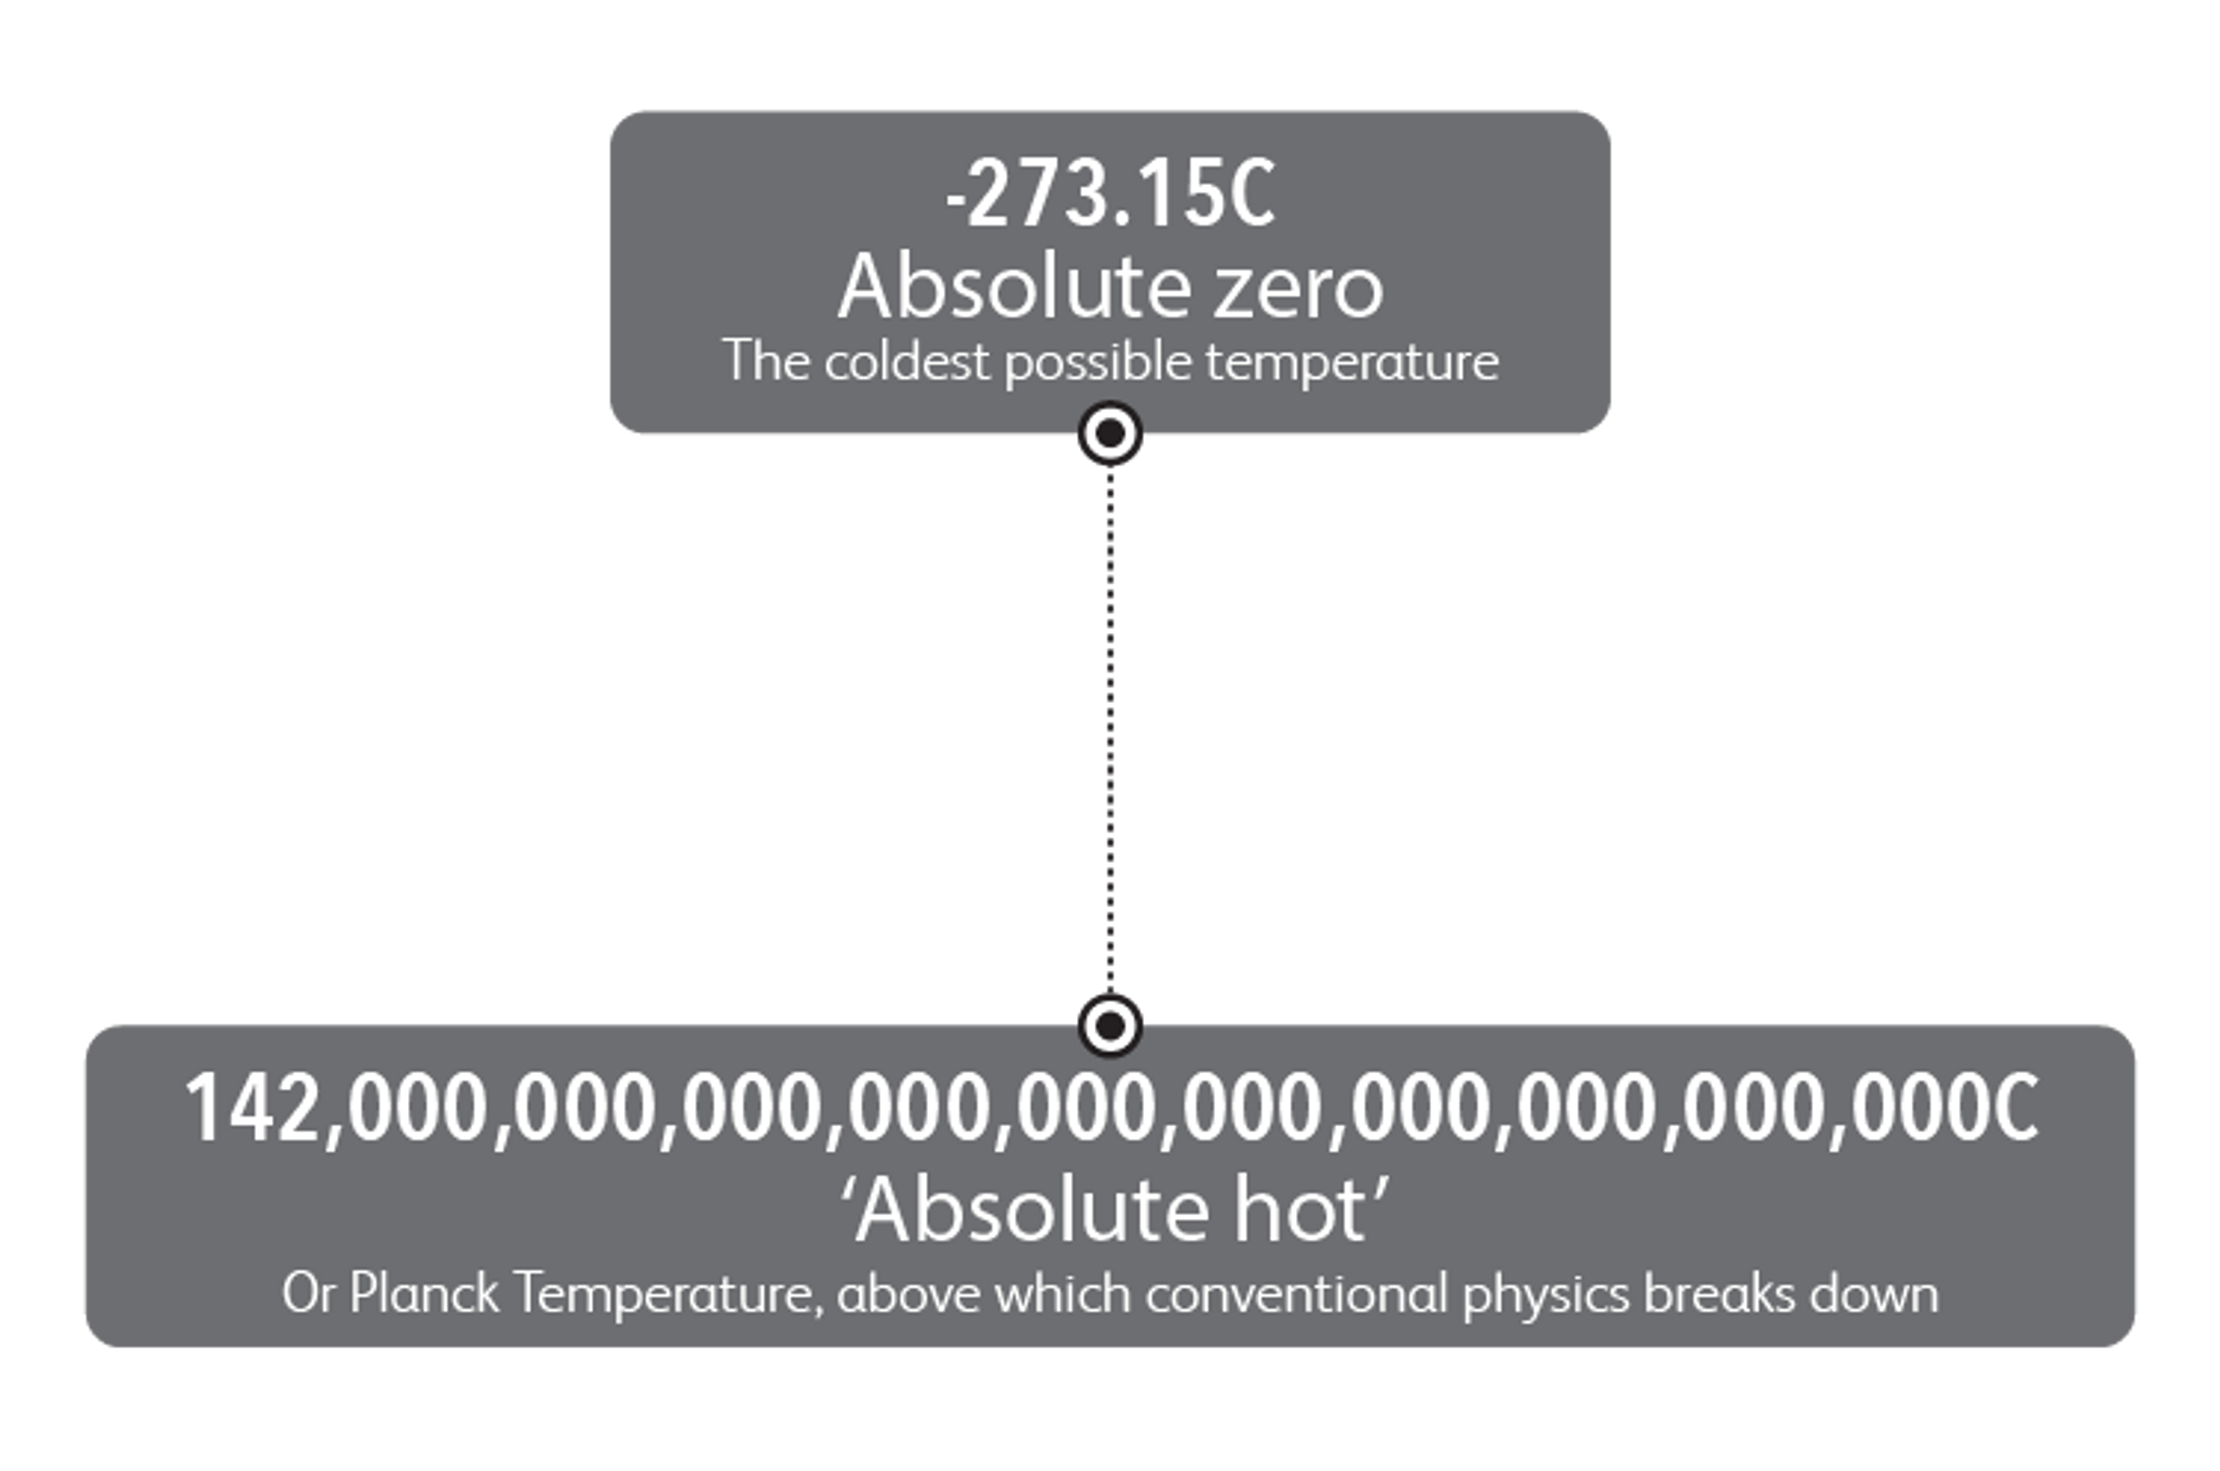 A graphic with two grey boxes showing the temperatures from both extremes of A Billion Degrees of separation. Absolute zero which is -273.15 celcius. And 'absolute hot', at 142 nonillion (30 zeros) celcius. A note on absolute hot says 'Or Planck Temperature, above which conventional physics breaks down.'